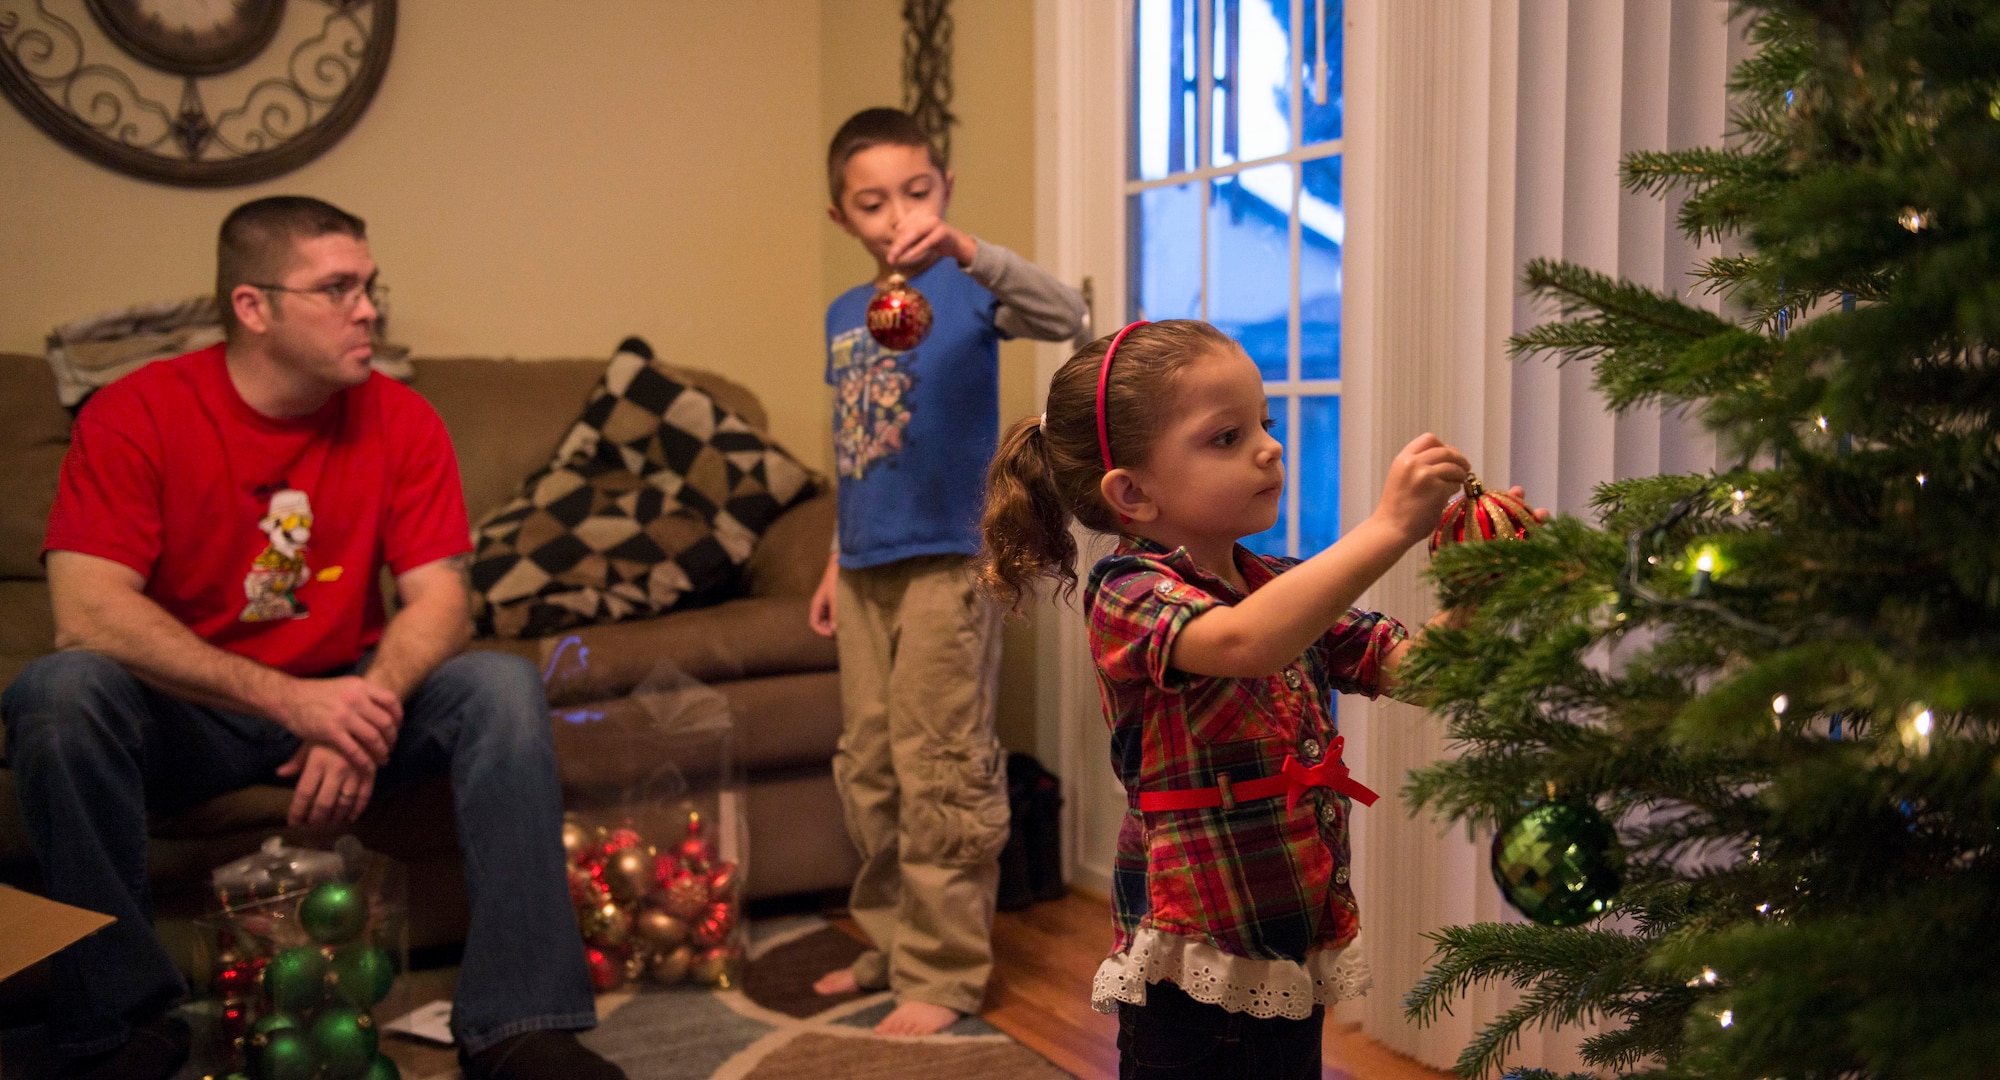 Tech. Sgt. Zachary Payne, 389th Aircraft Maintenance Unit weapons expeditor, watches his son and daughter decorate their family Christmas tree in Mountain Home, Idaho, Dec. 5, 2015. Payne’s wife is currently deployed, so the family sent her a tree of her own to decorate while she's away. (U.S. Air Force photo by Airman 1st Class Jessica H. Evans/RELEASED)